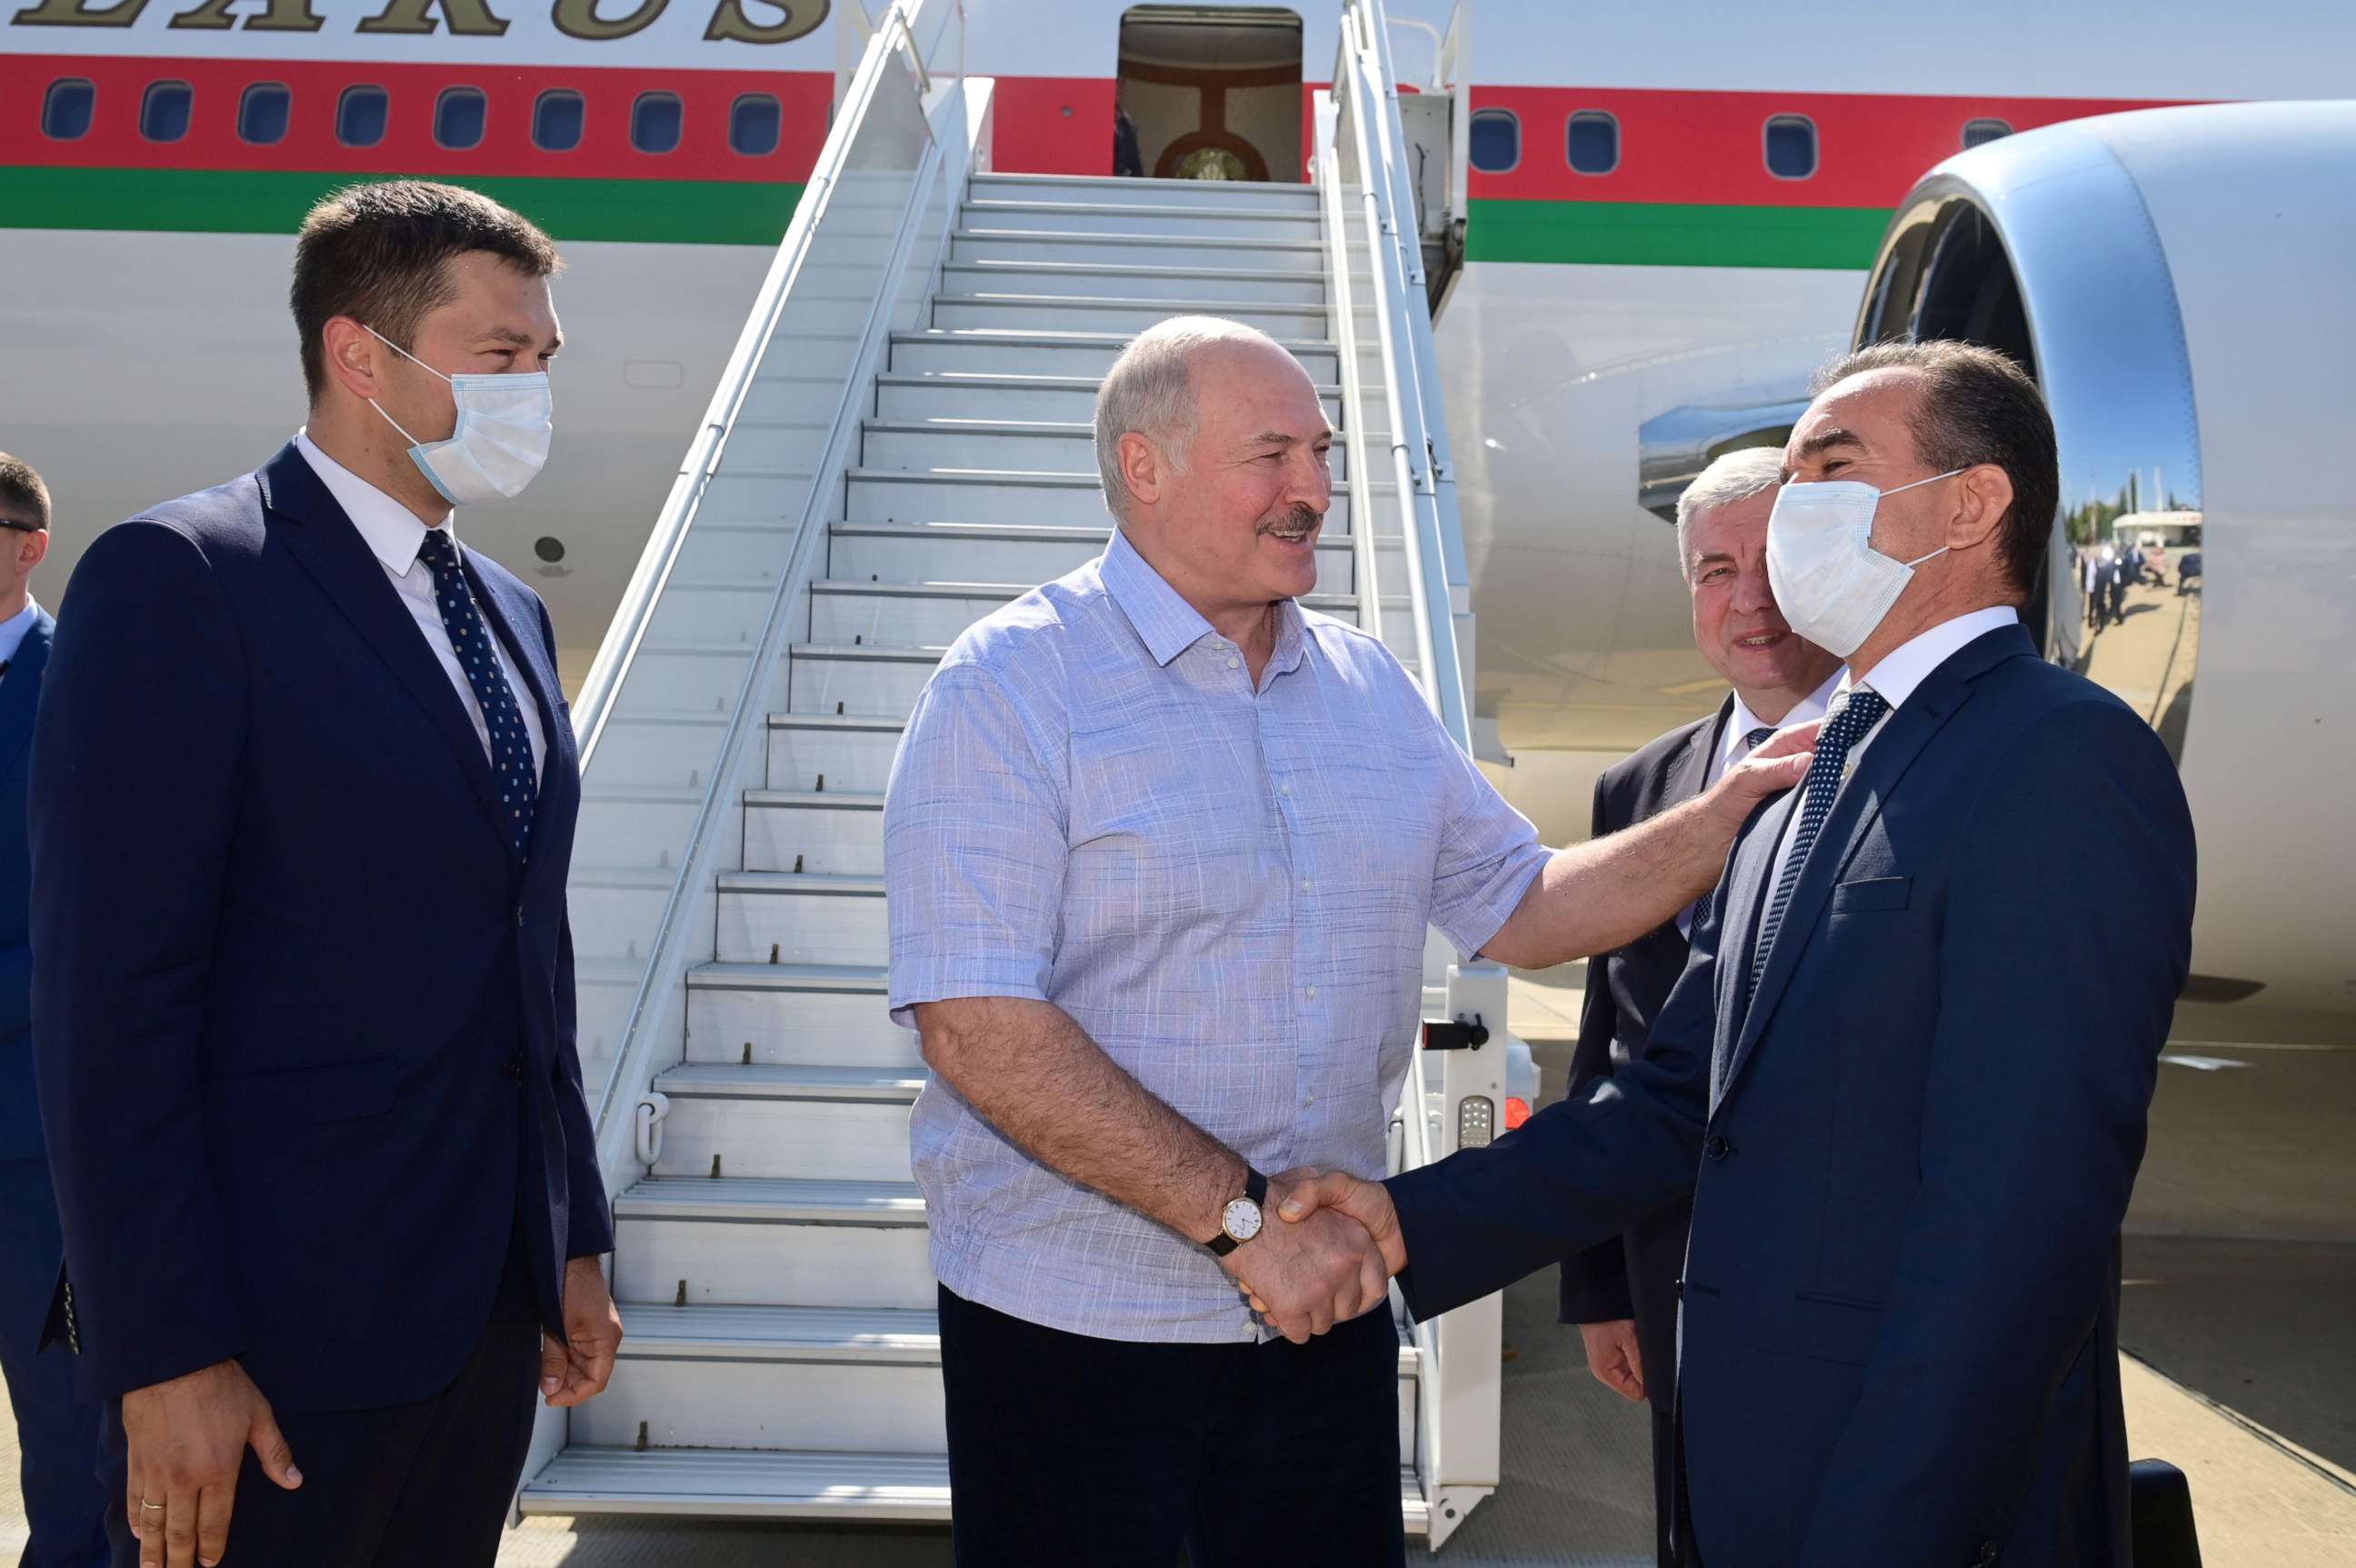 PHOTO: Belarusian President Alexander Lukashenko greets officials during a welcoming ceremony upon his arrival at an airport in Sochi, Russia September 14, 2020.